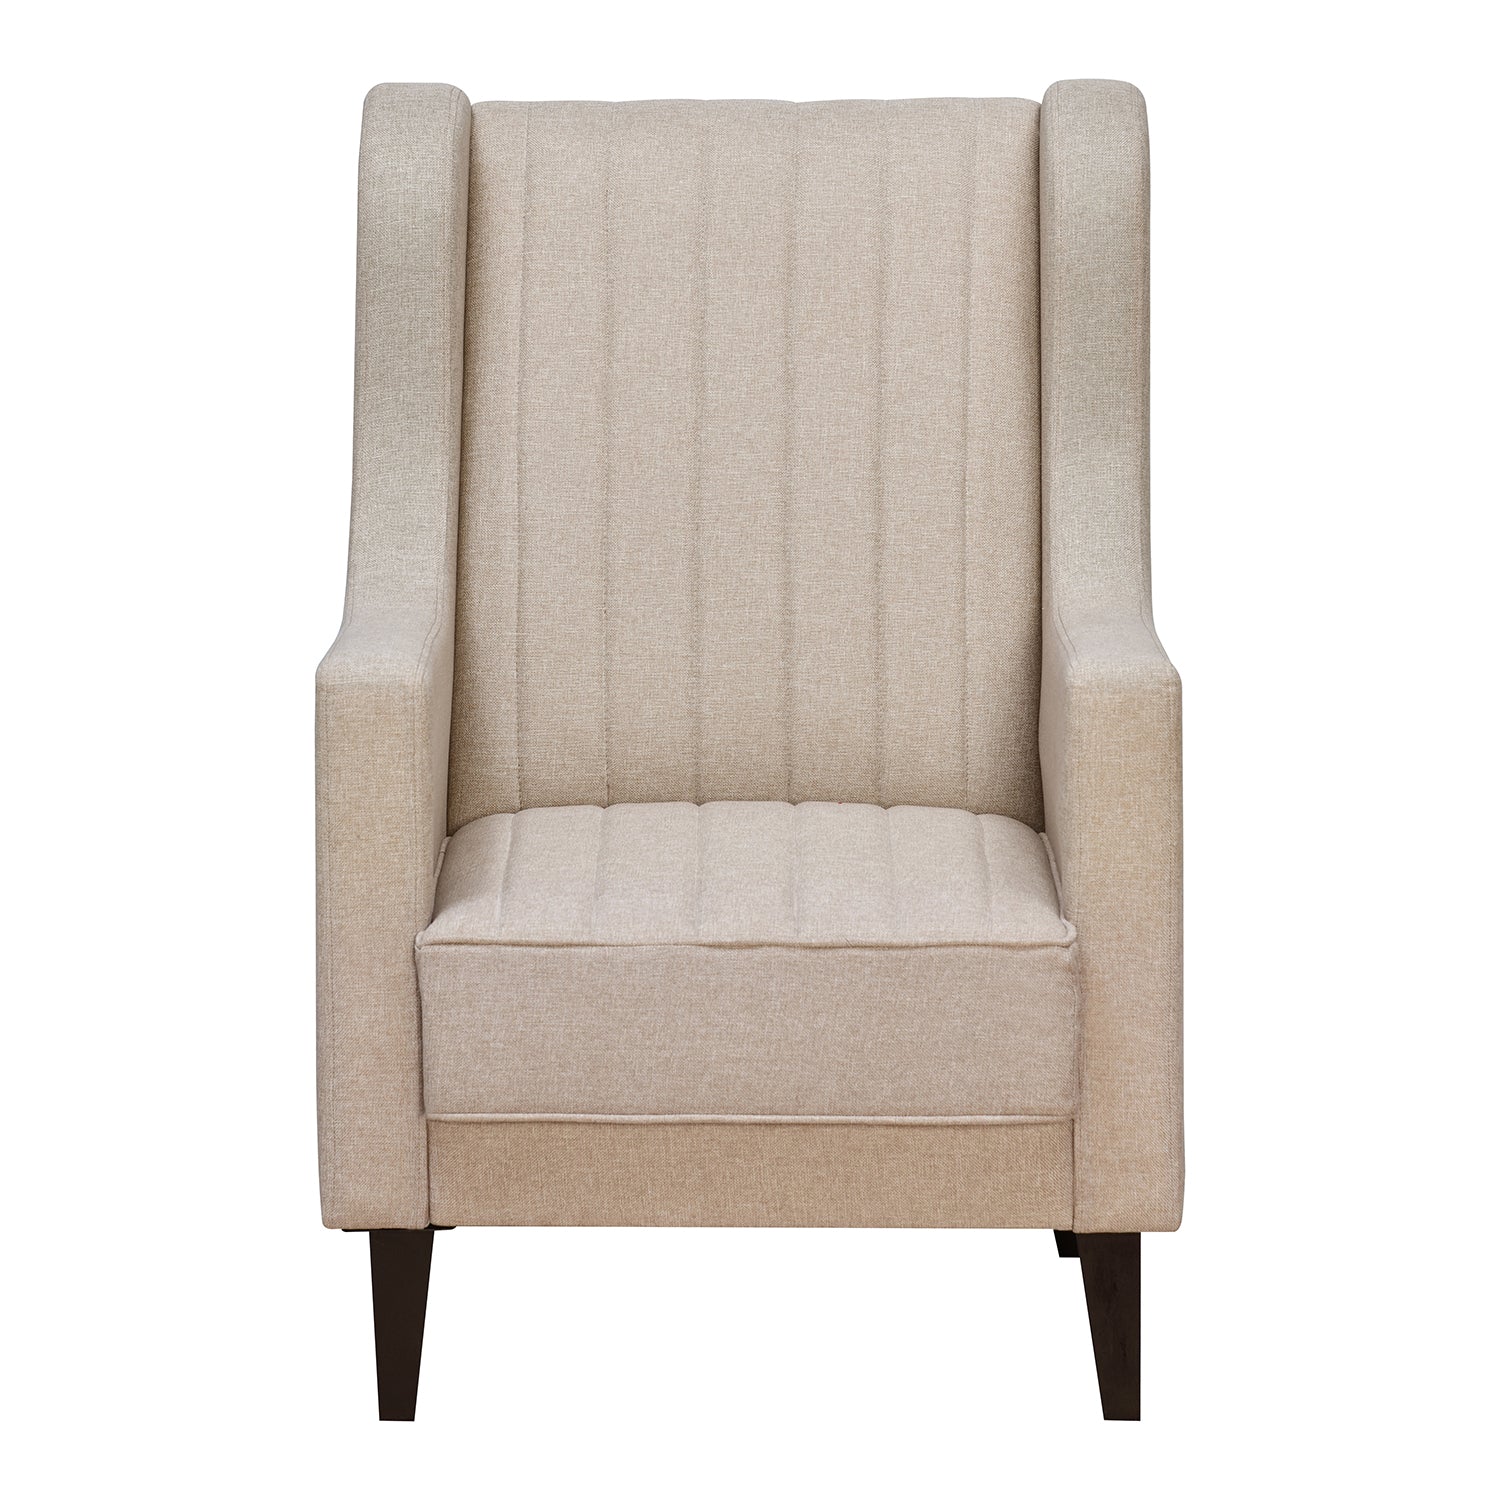 Leroy Fabric Upholstered Wingback Arm Chair (Beige)